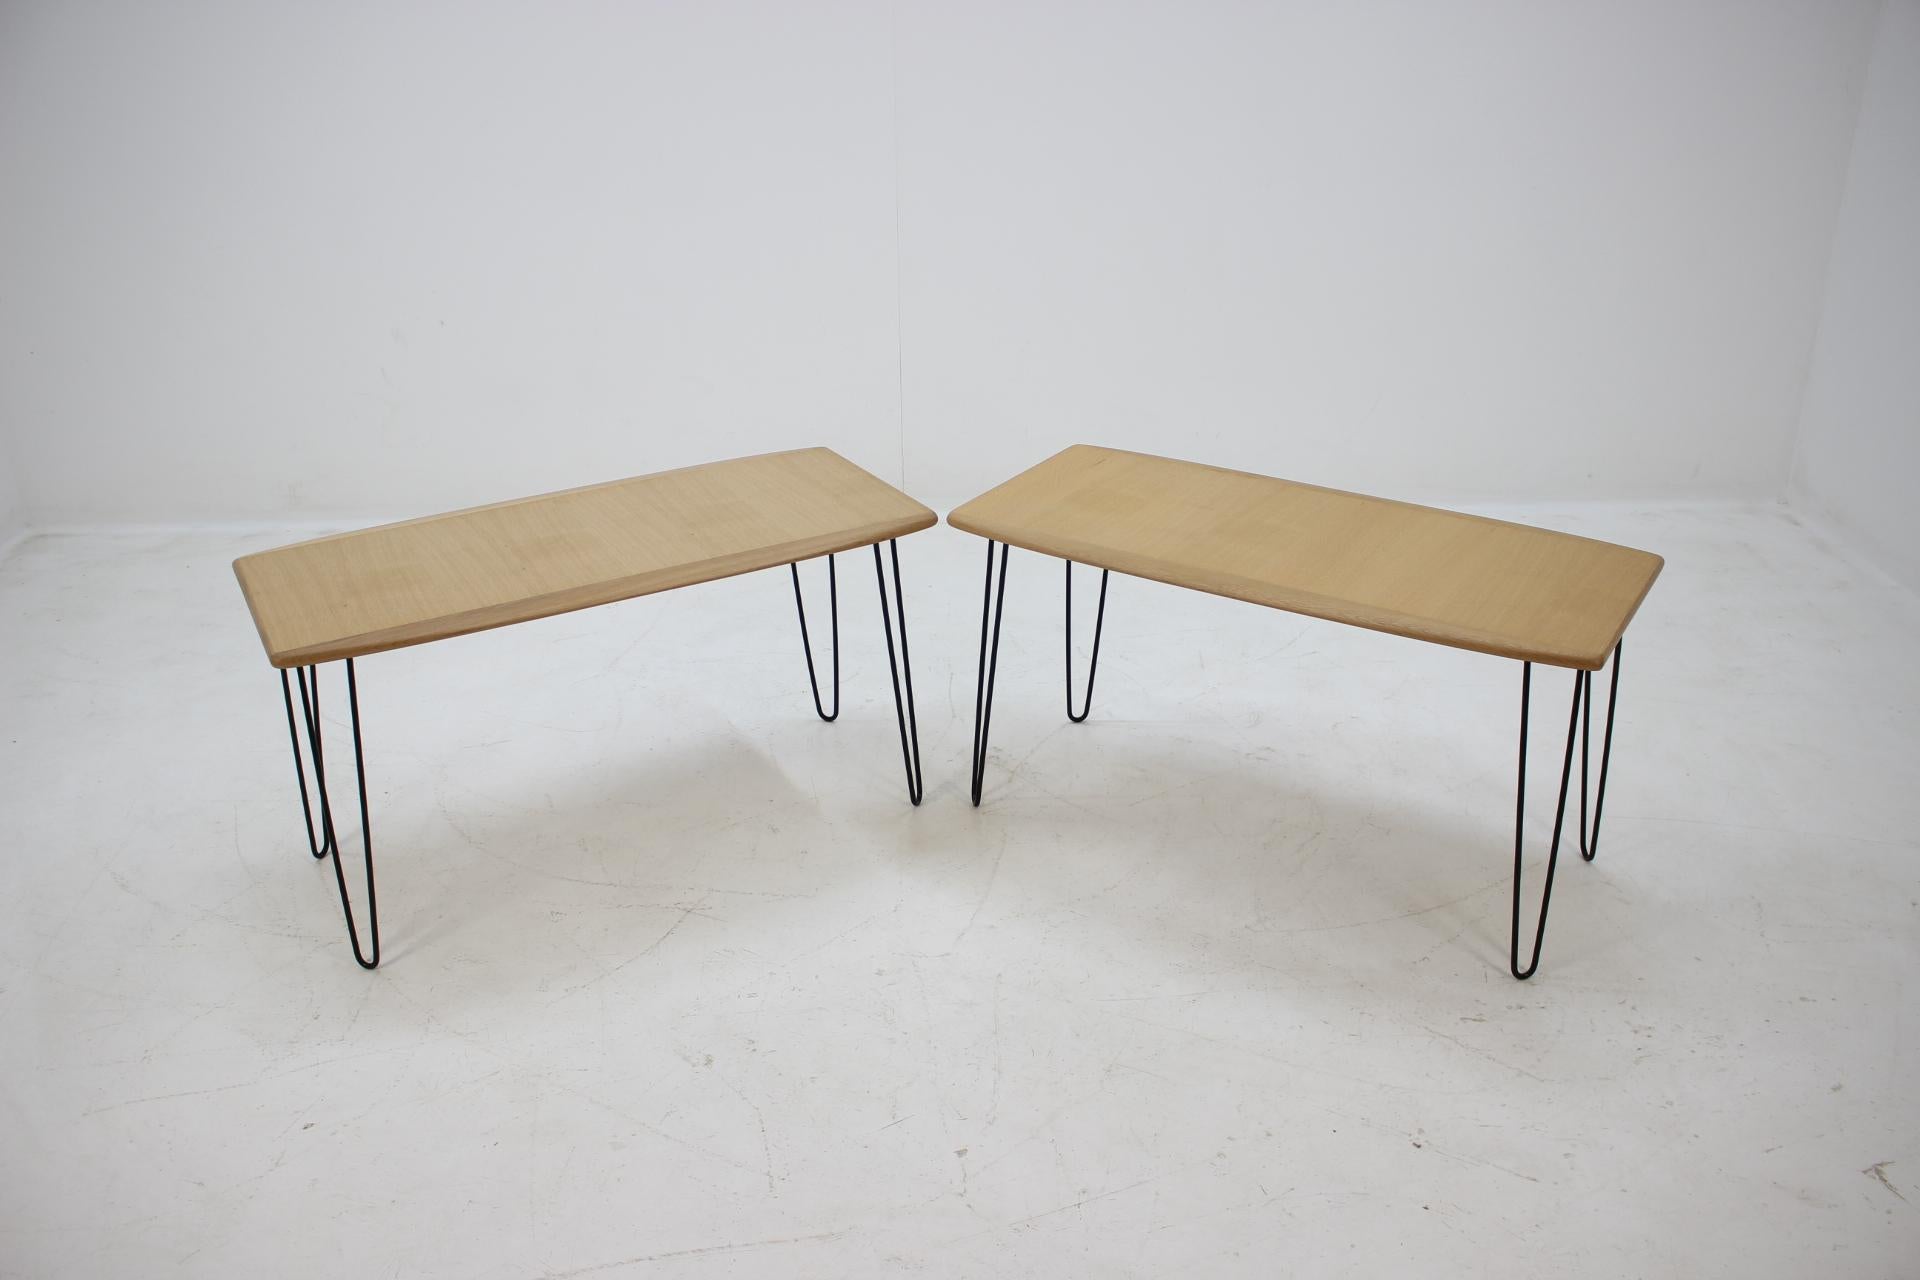 - The top desk has been repolished 
- The iron legs were added afterwards 
- Two pieces available.